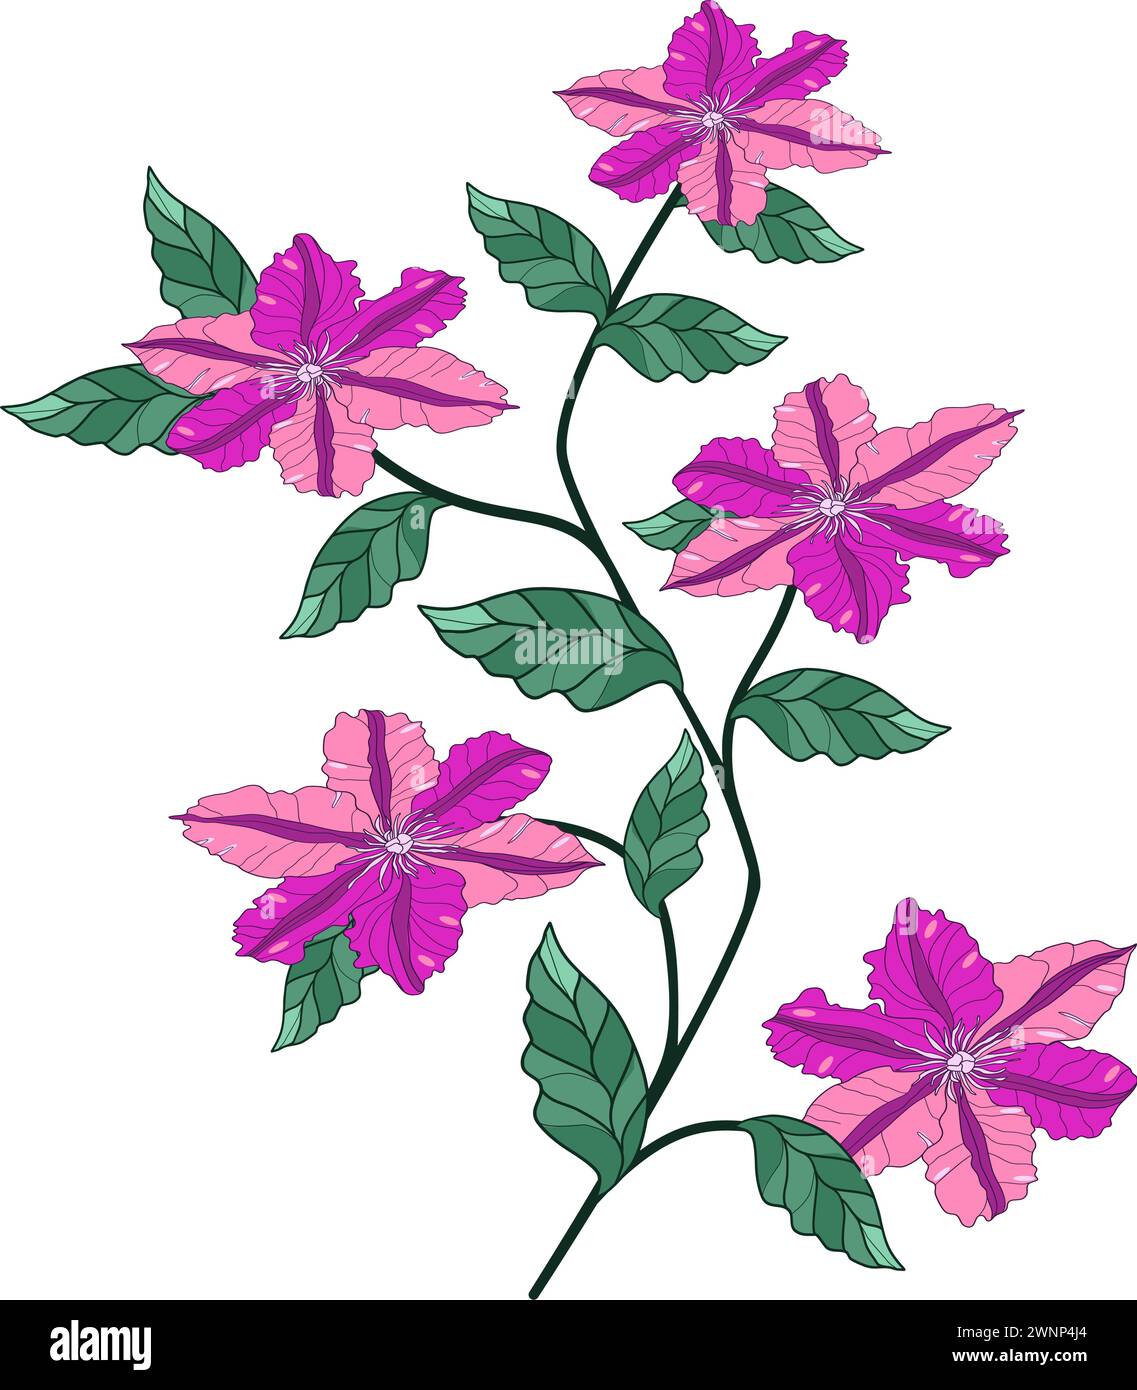 Clematis plant with flowers and leaves vector illustration Stock Vector